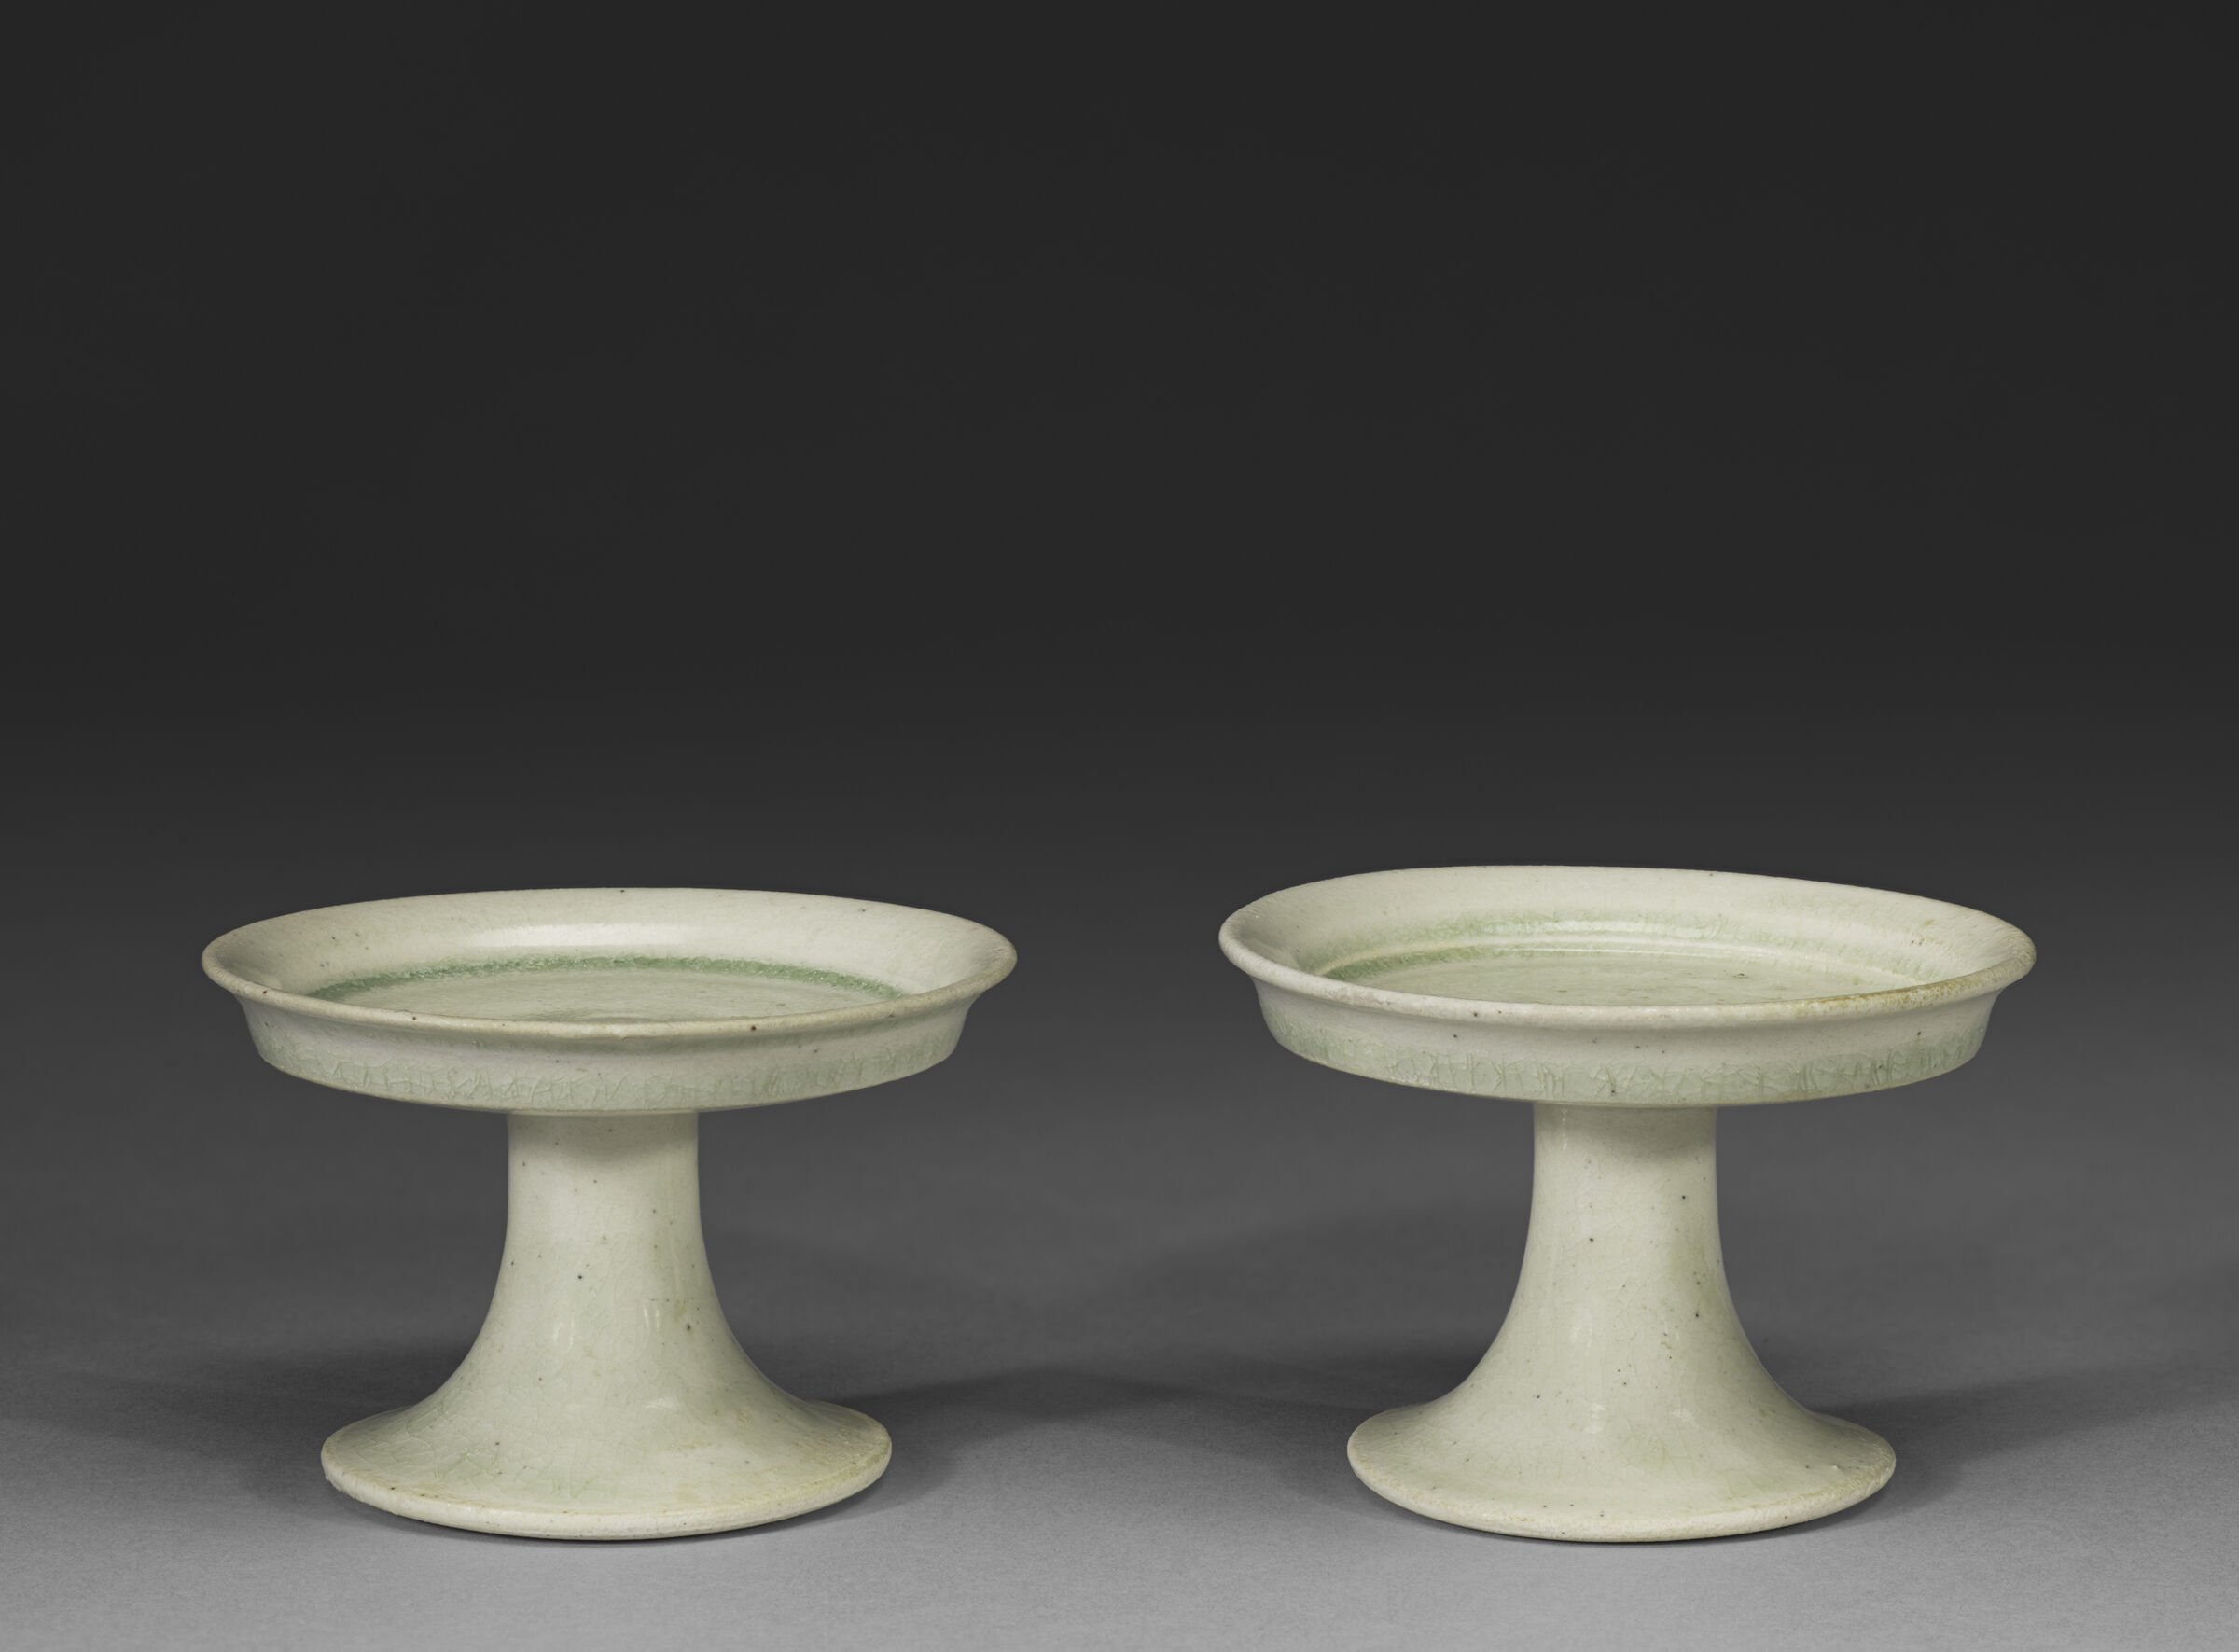 A Pair Of Small Pedestal Dishes